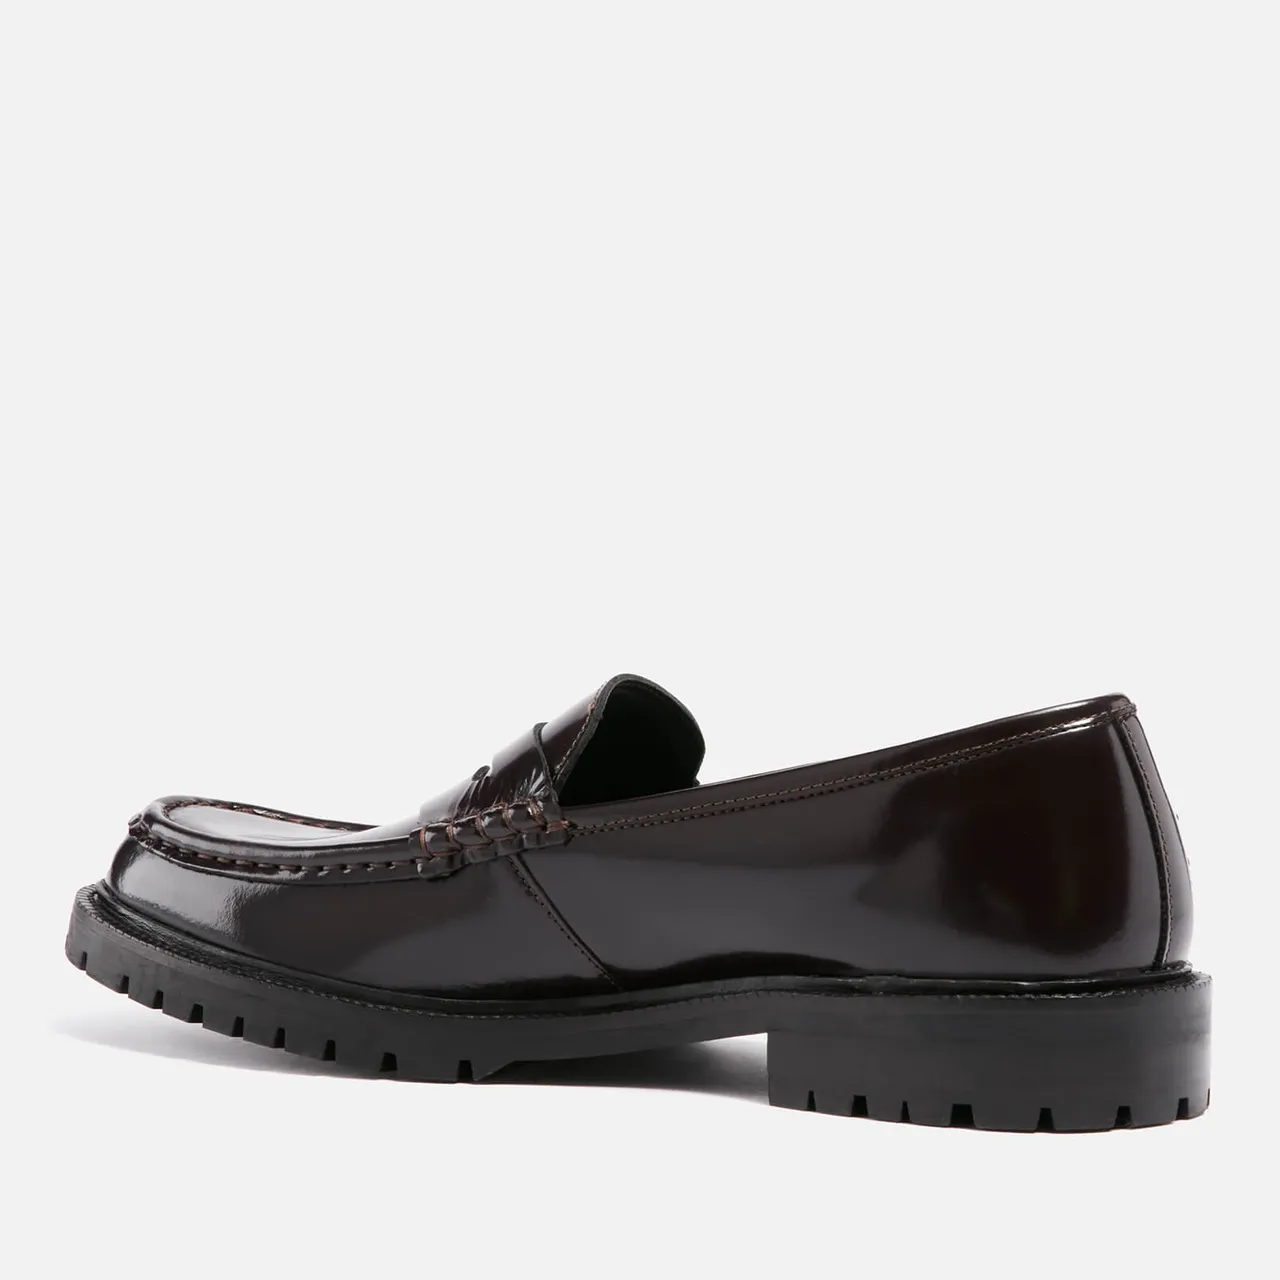 Walk London Men's Campus Leather Saddle Loafers